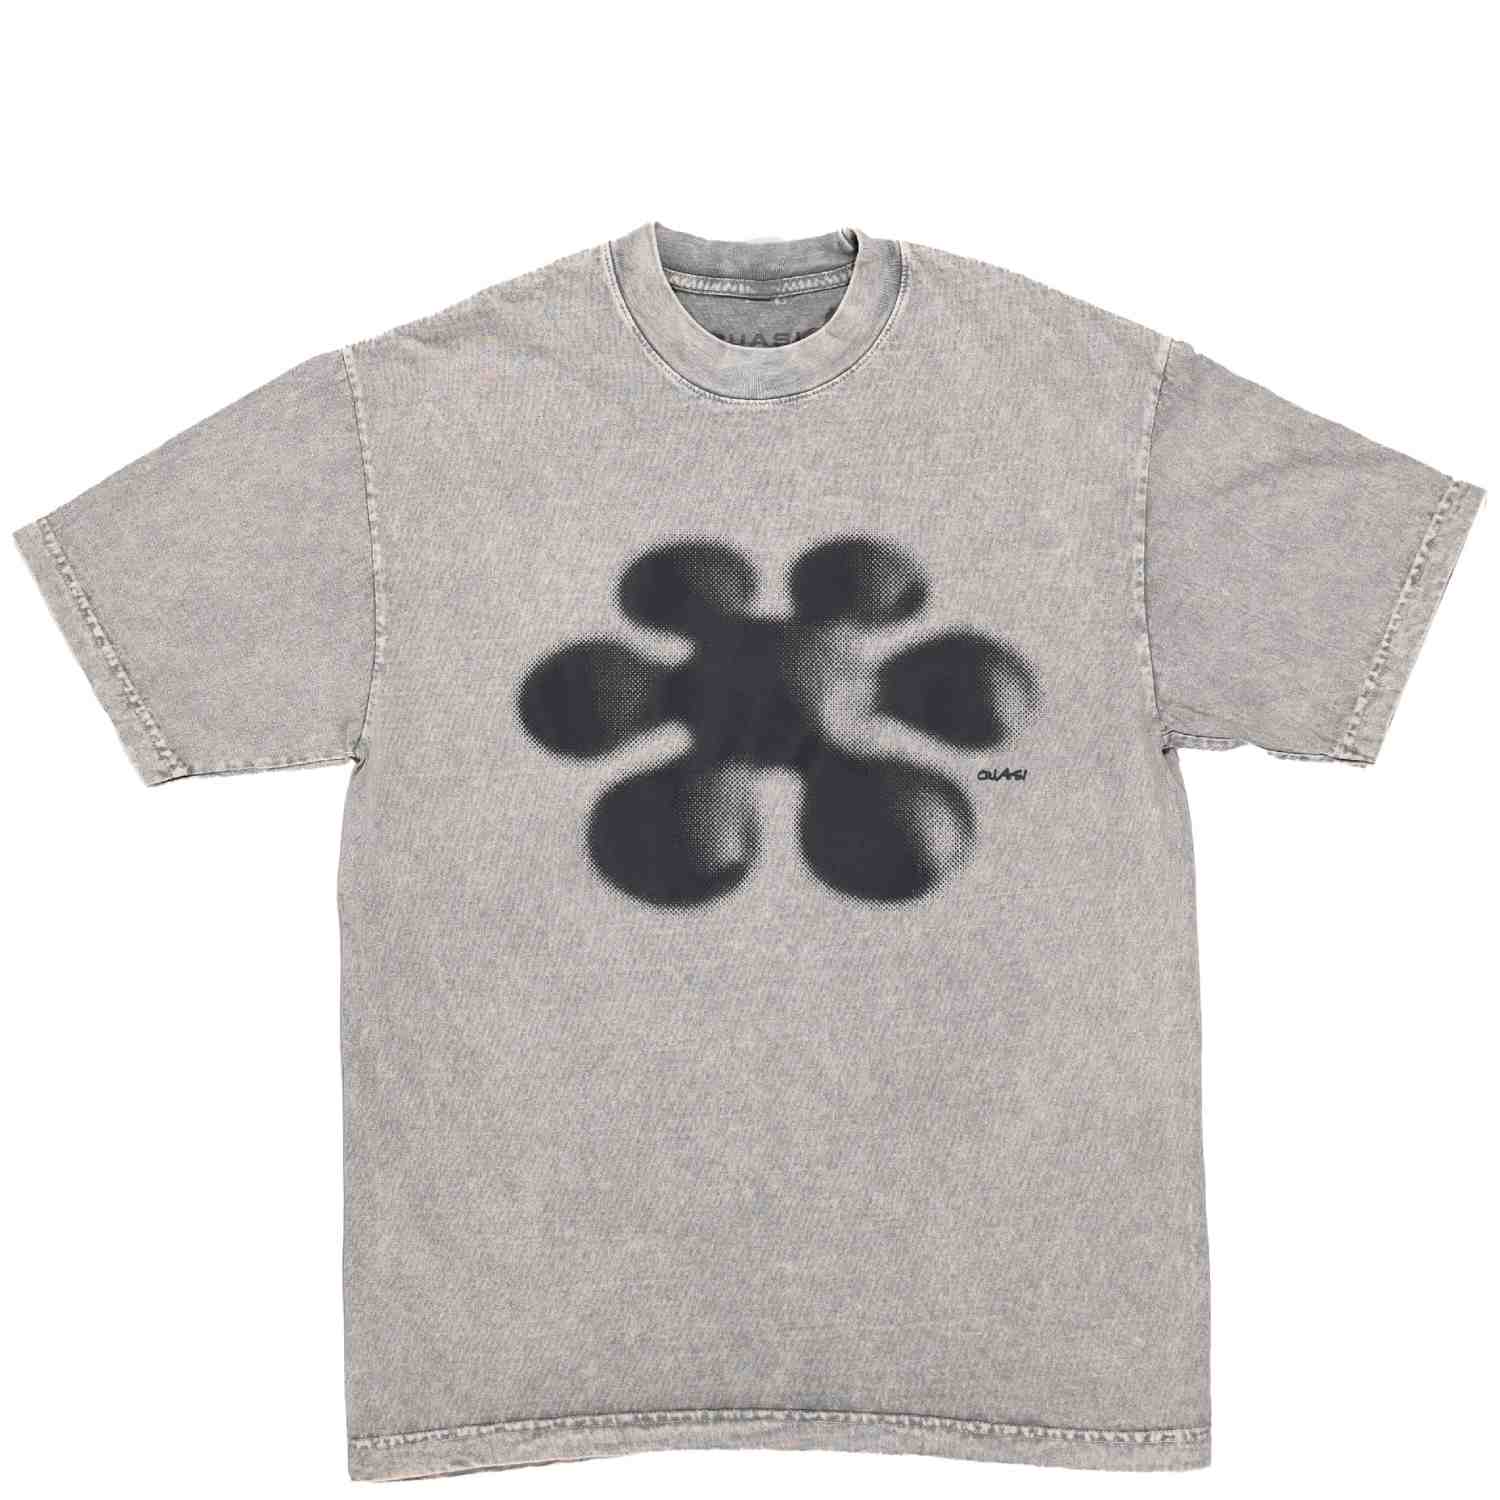 The Quasi Spun Tee Limestone is crafted from premium Midweight 6.5oz Cotton Jersey, featuring a stunning Garment Dye and Mineral Wash for a unique, textured look. With a High Raise Puff Print and 100% Cotton construction, this tee is both stylish and comfortable.